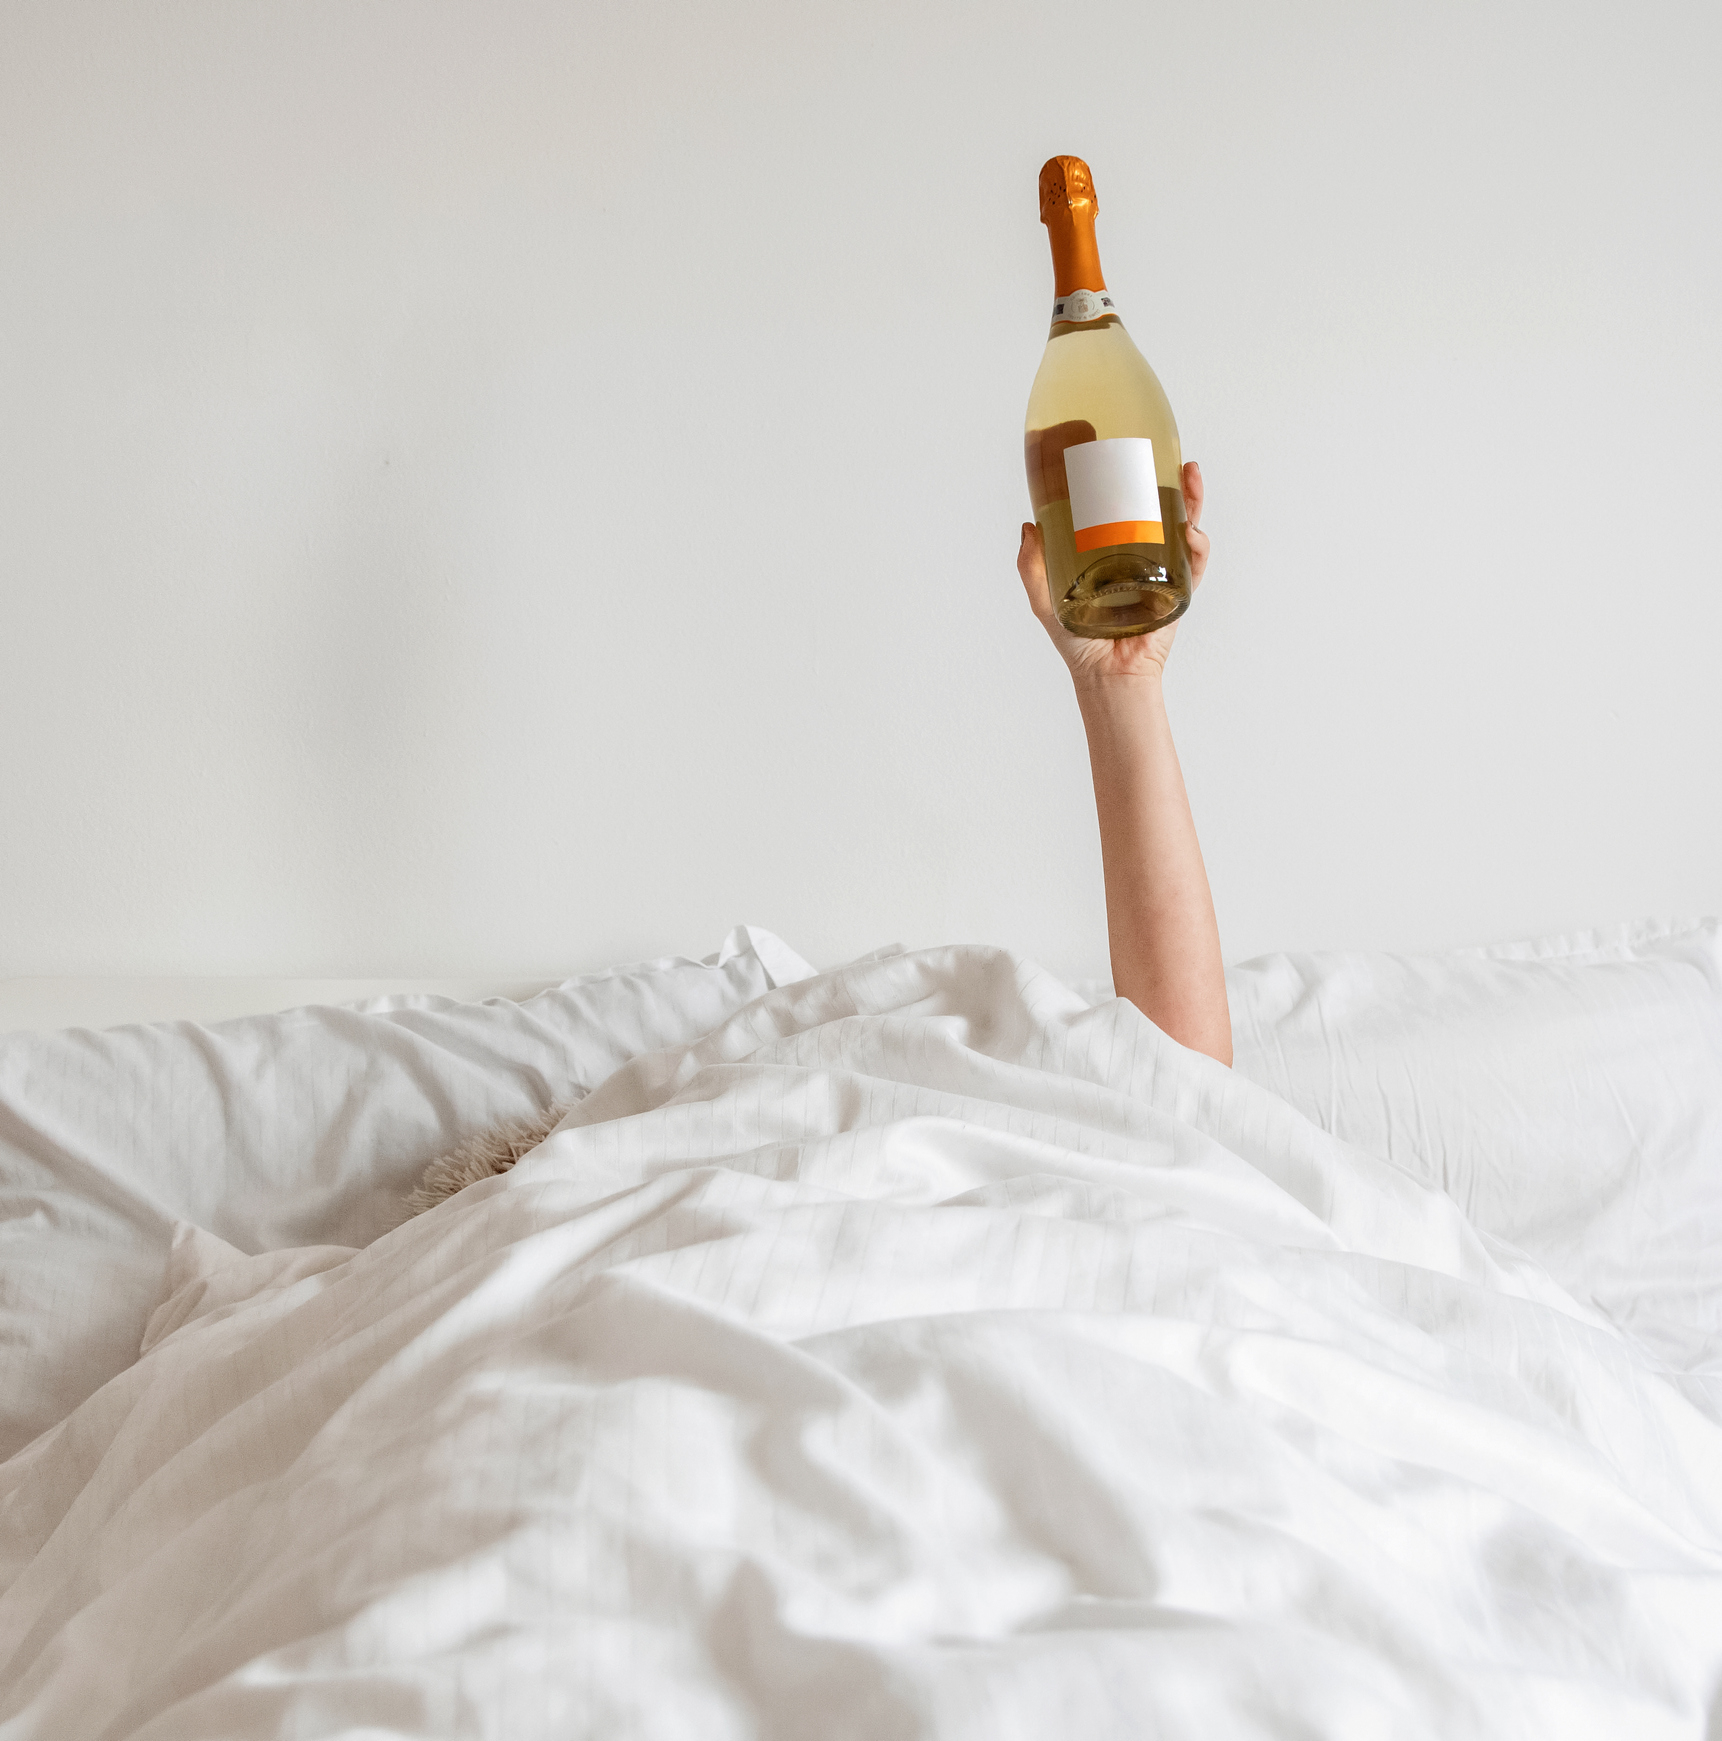 A hand holding up a bottle of wine from under the covers in a bed